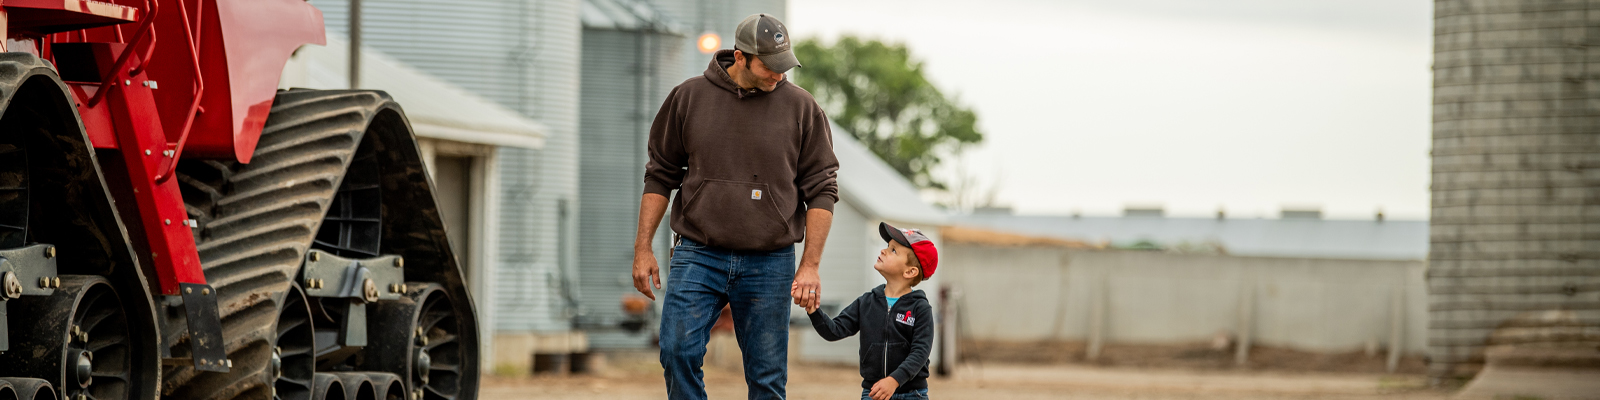 Father and son by farm machinery